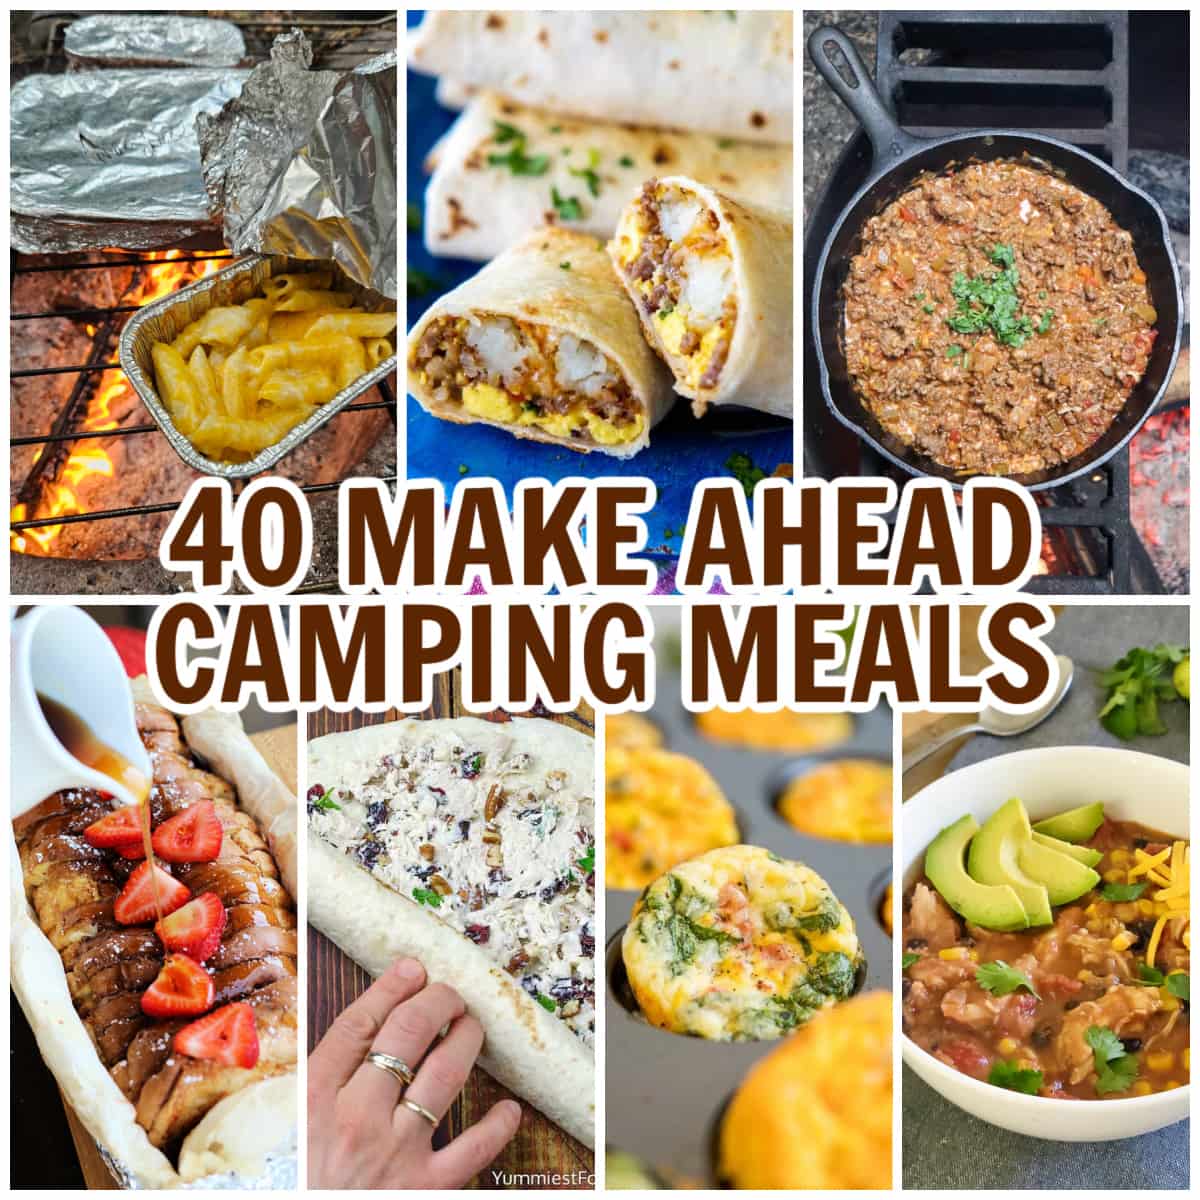 https://refreshcamping.com/wp-content/uploads/2023/06/make-ahead-camping-meals-2.jpg